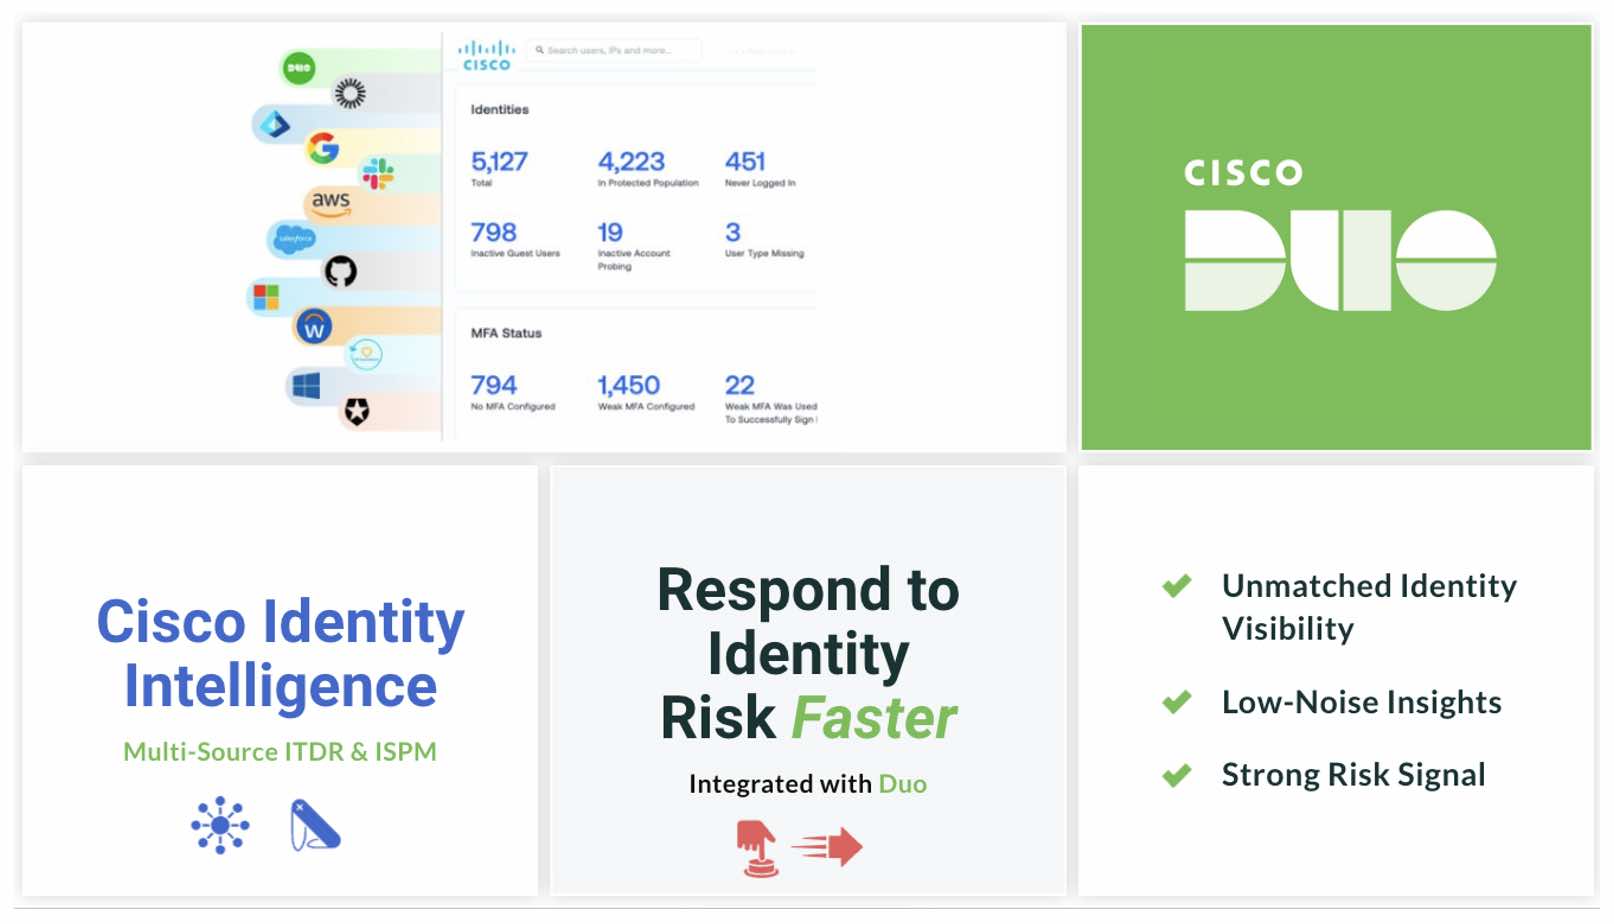 Graphic showing how Cisco Duo integrates with Cisco Identity intelligence Multi-Source ITDR and ISPM to allow users to respond to identity risk faster and providing them with 1) Unmatched identity visibility 2) Low-noise insights, 3) Strong risk signal